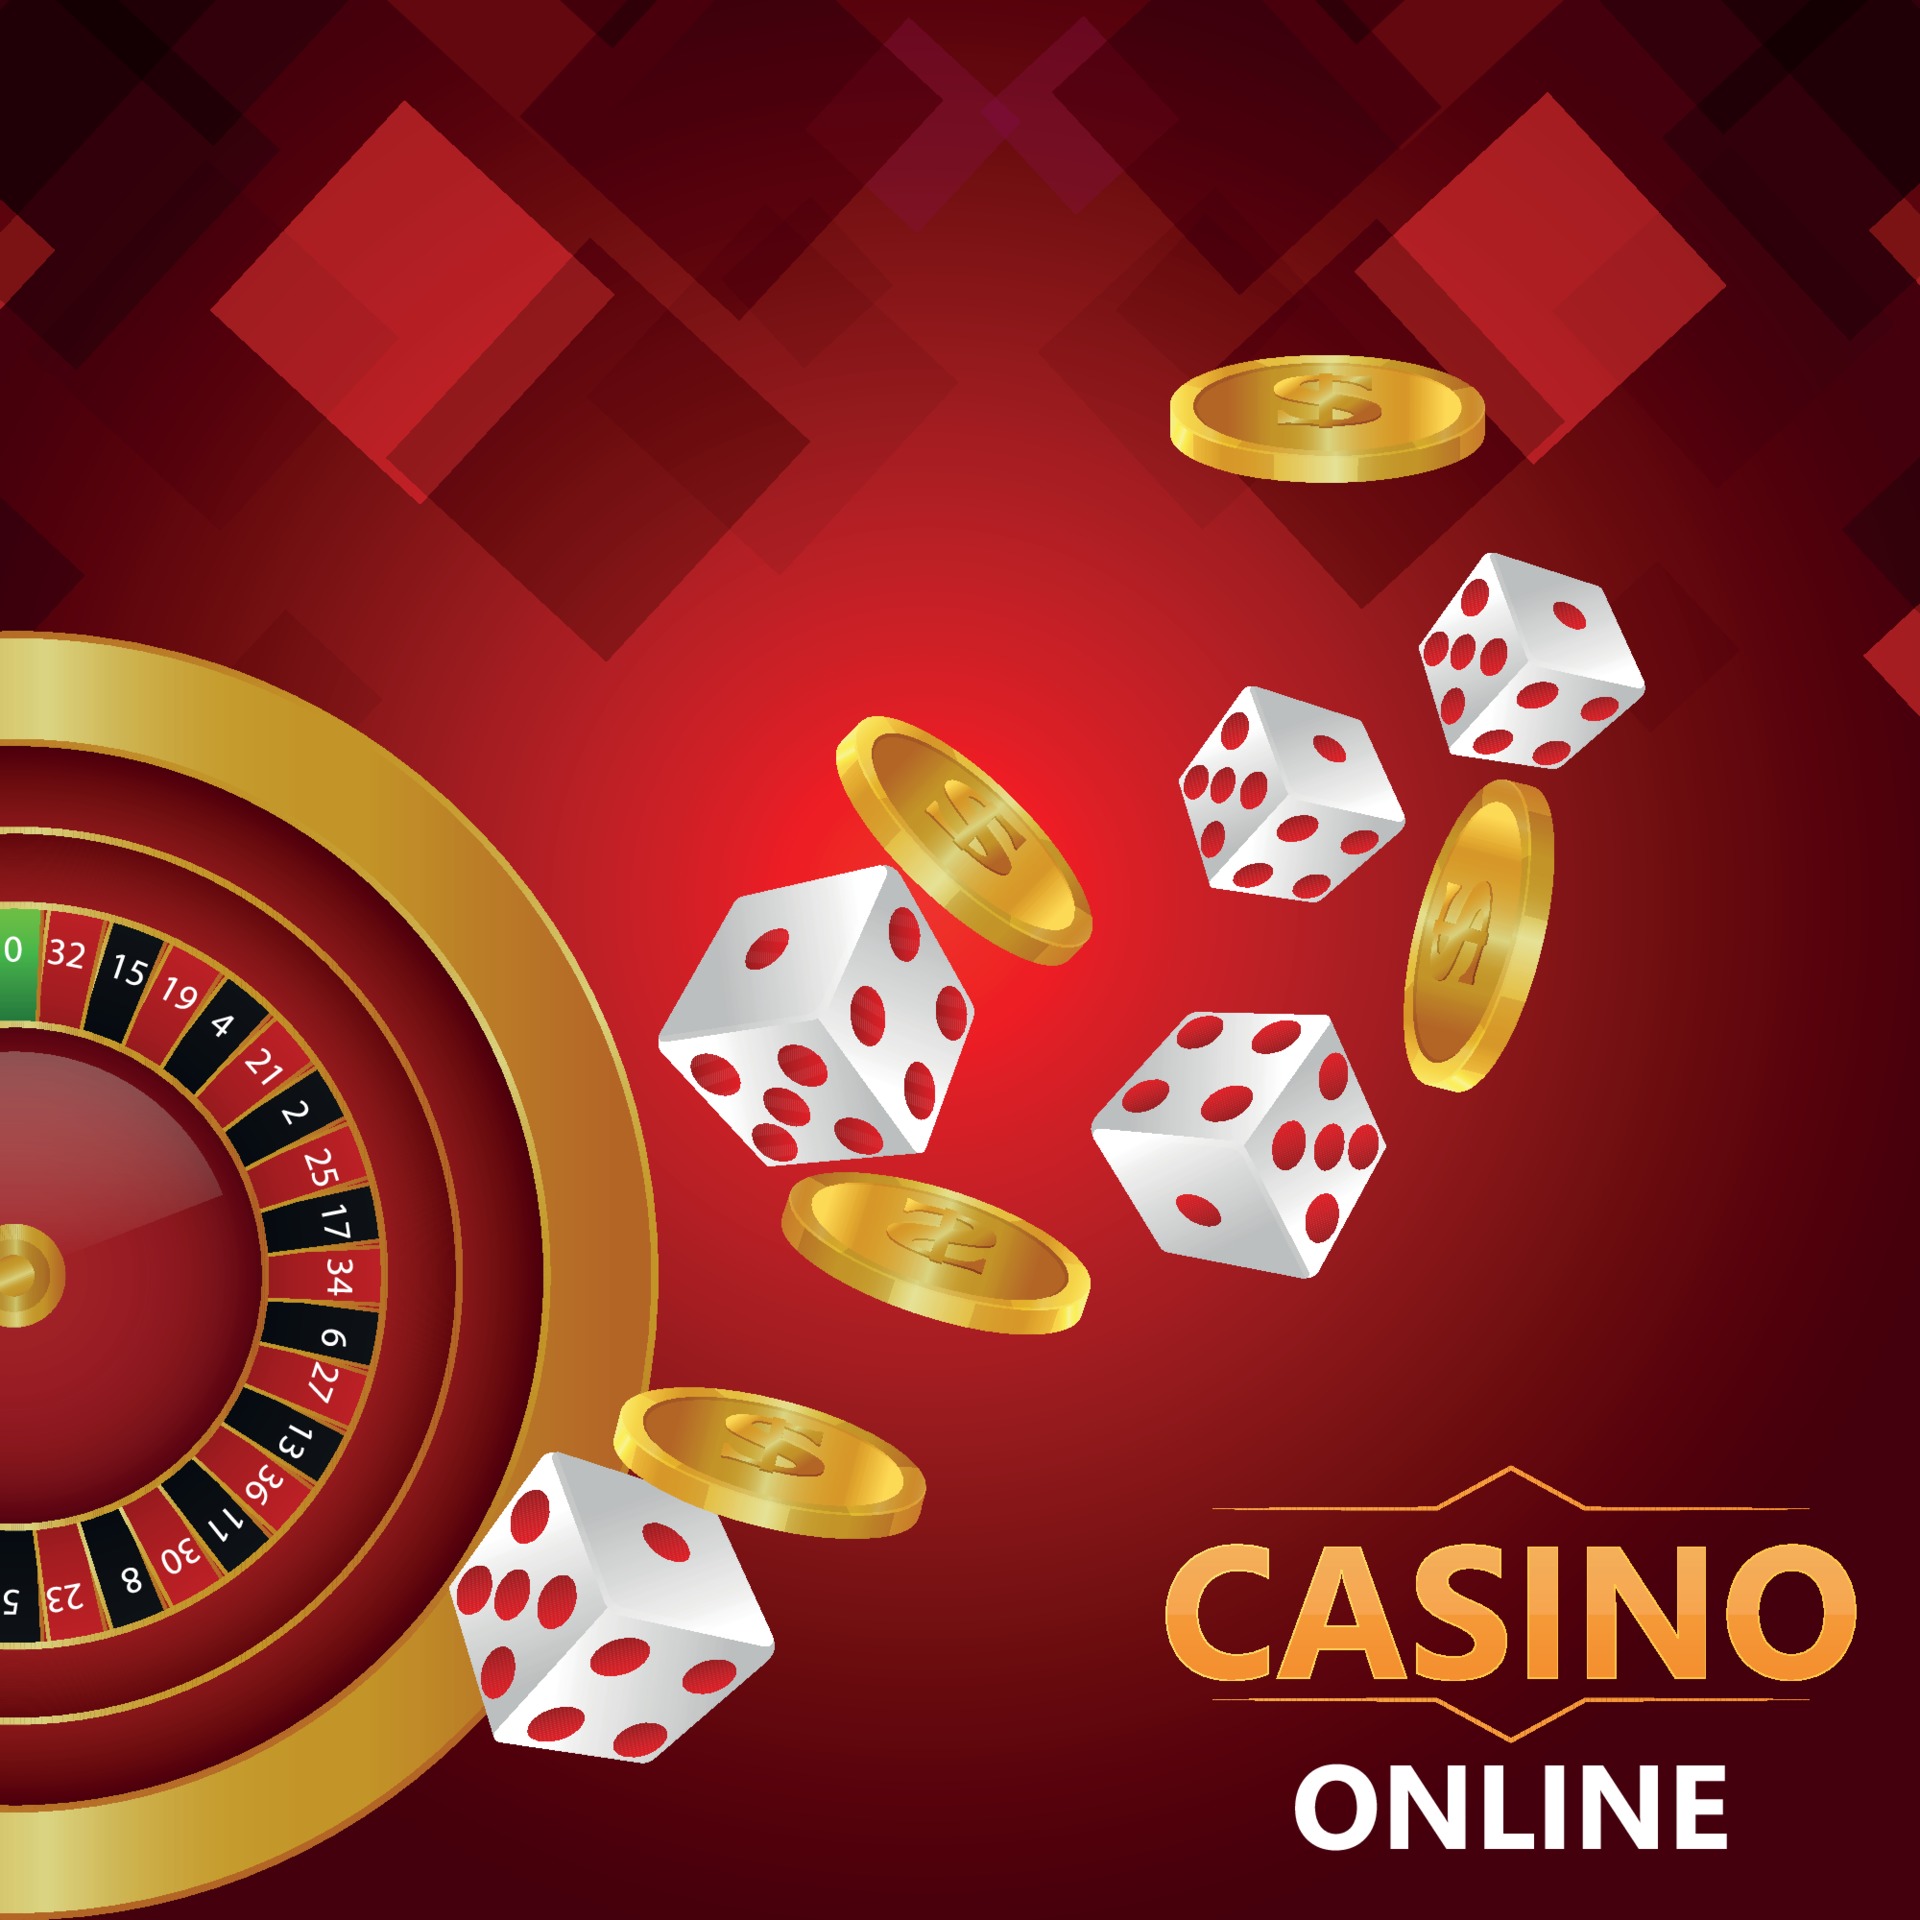 50 Reasons to casino game in 2021